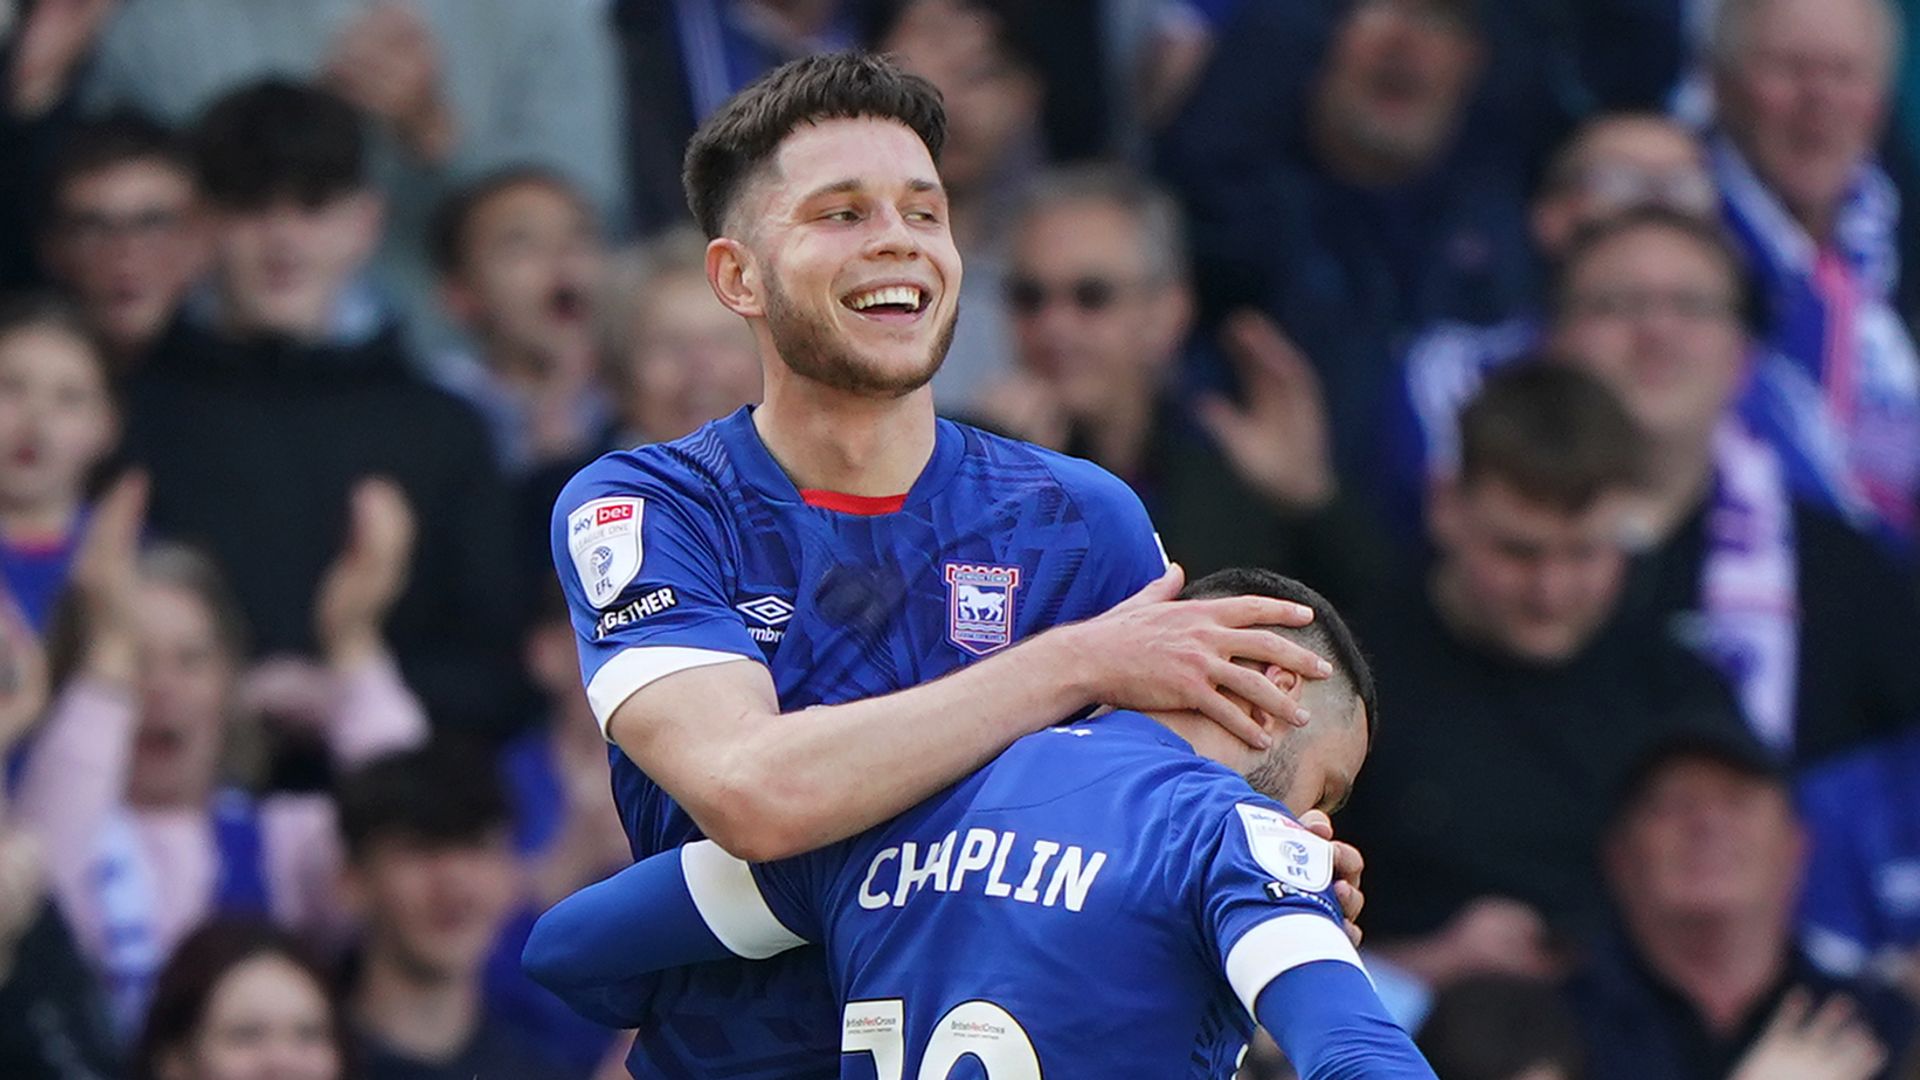 Ipswich thump Exeter to seal promotion to Championship